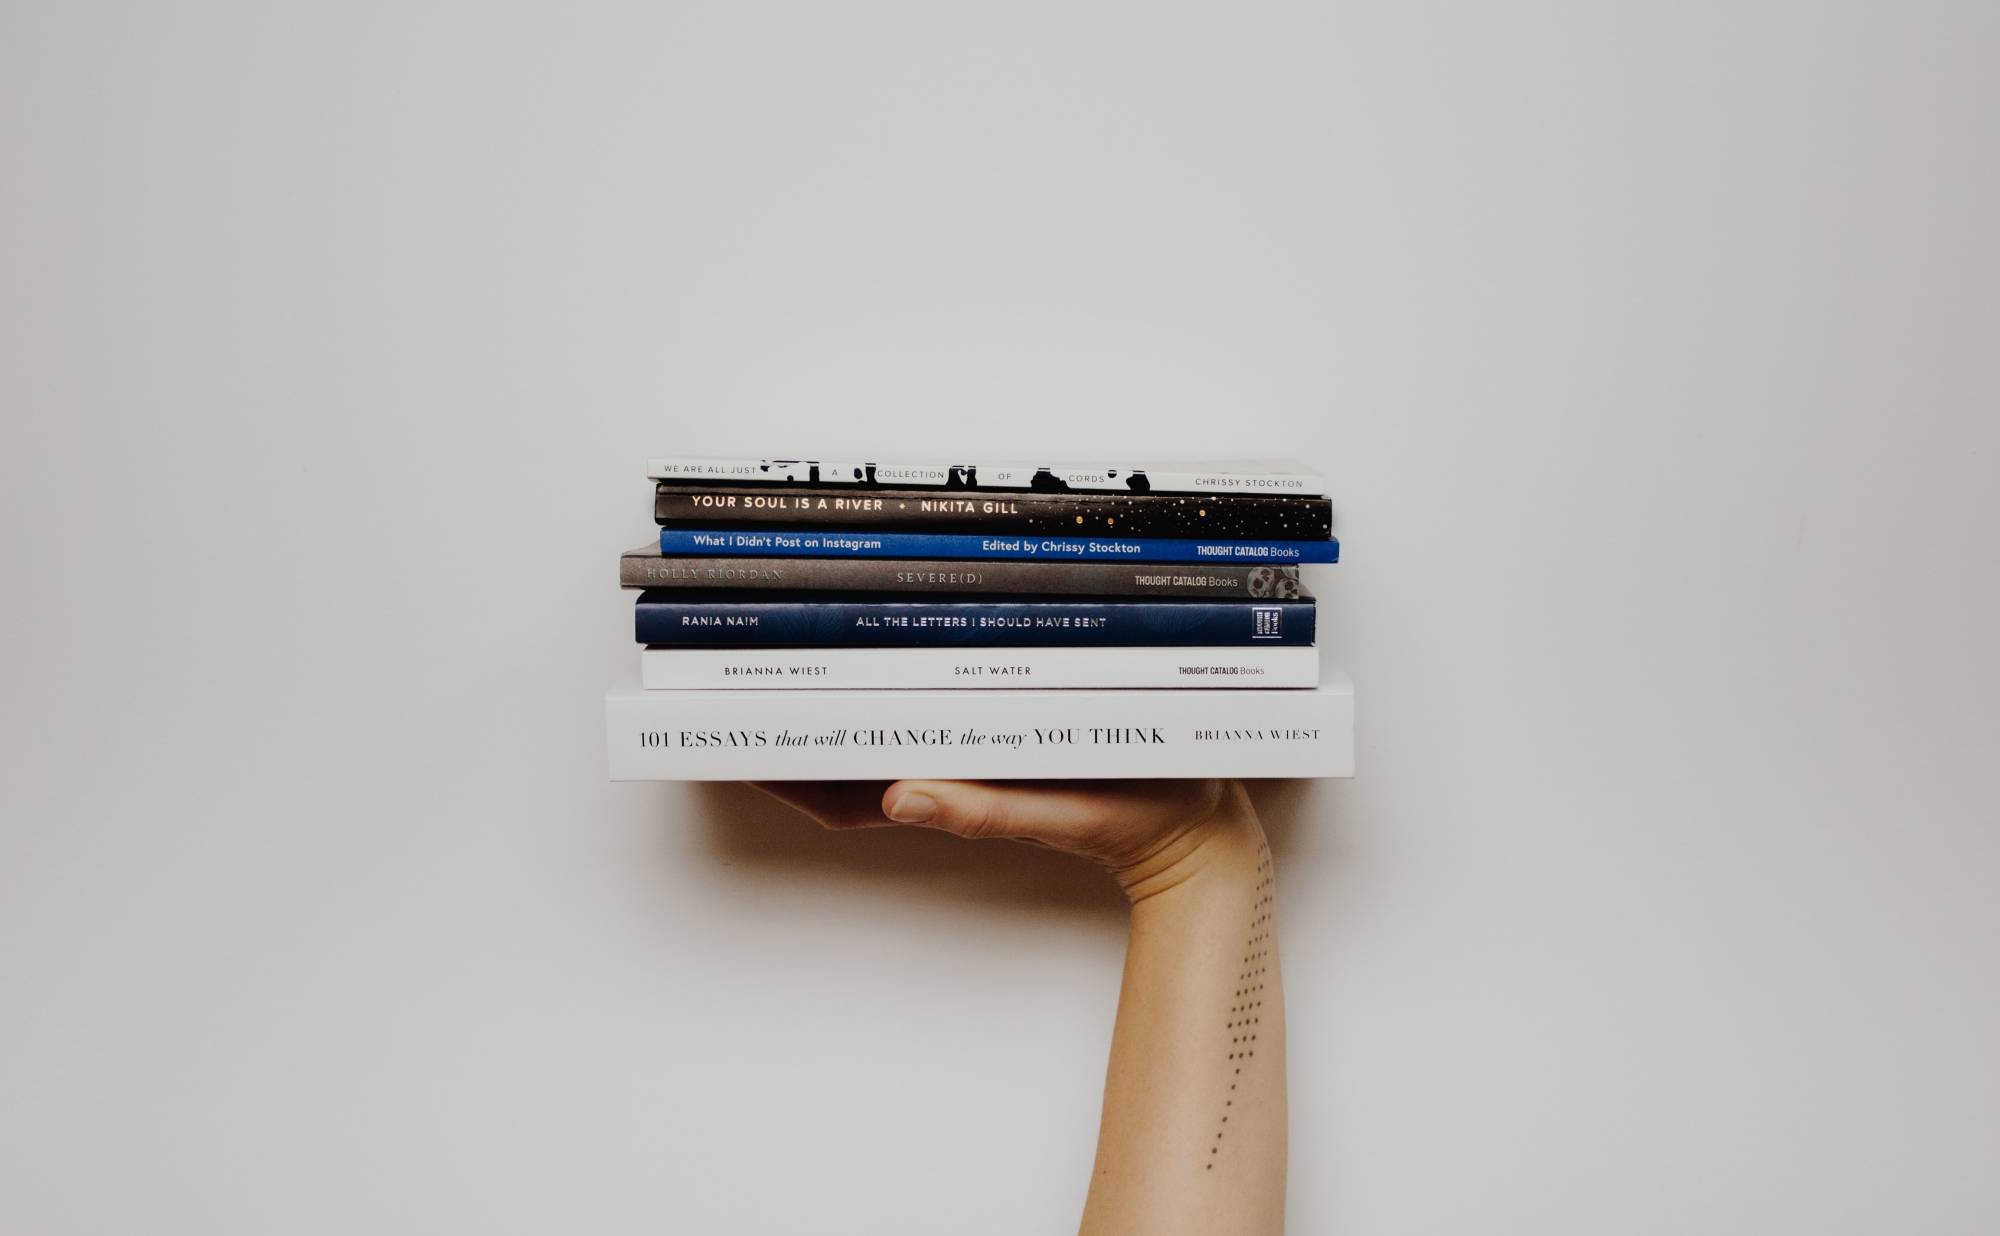 Photo of a person holding up a stack of books